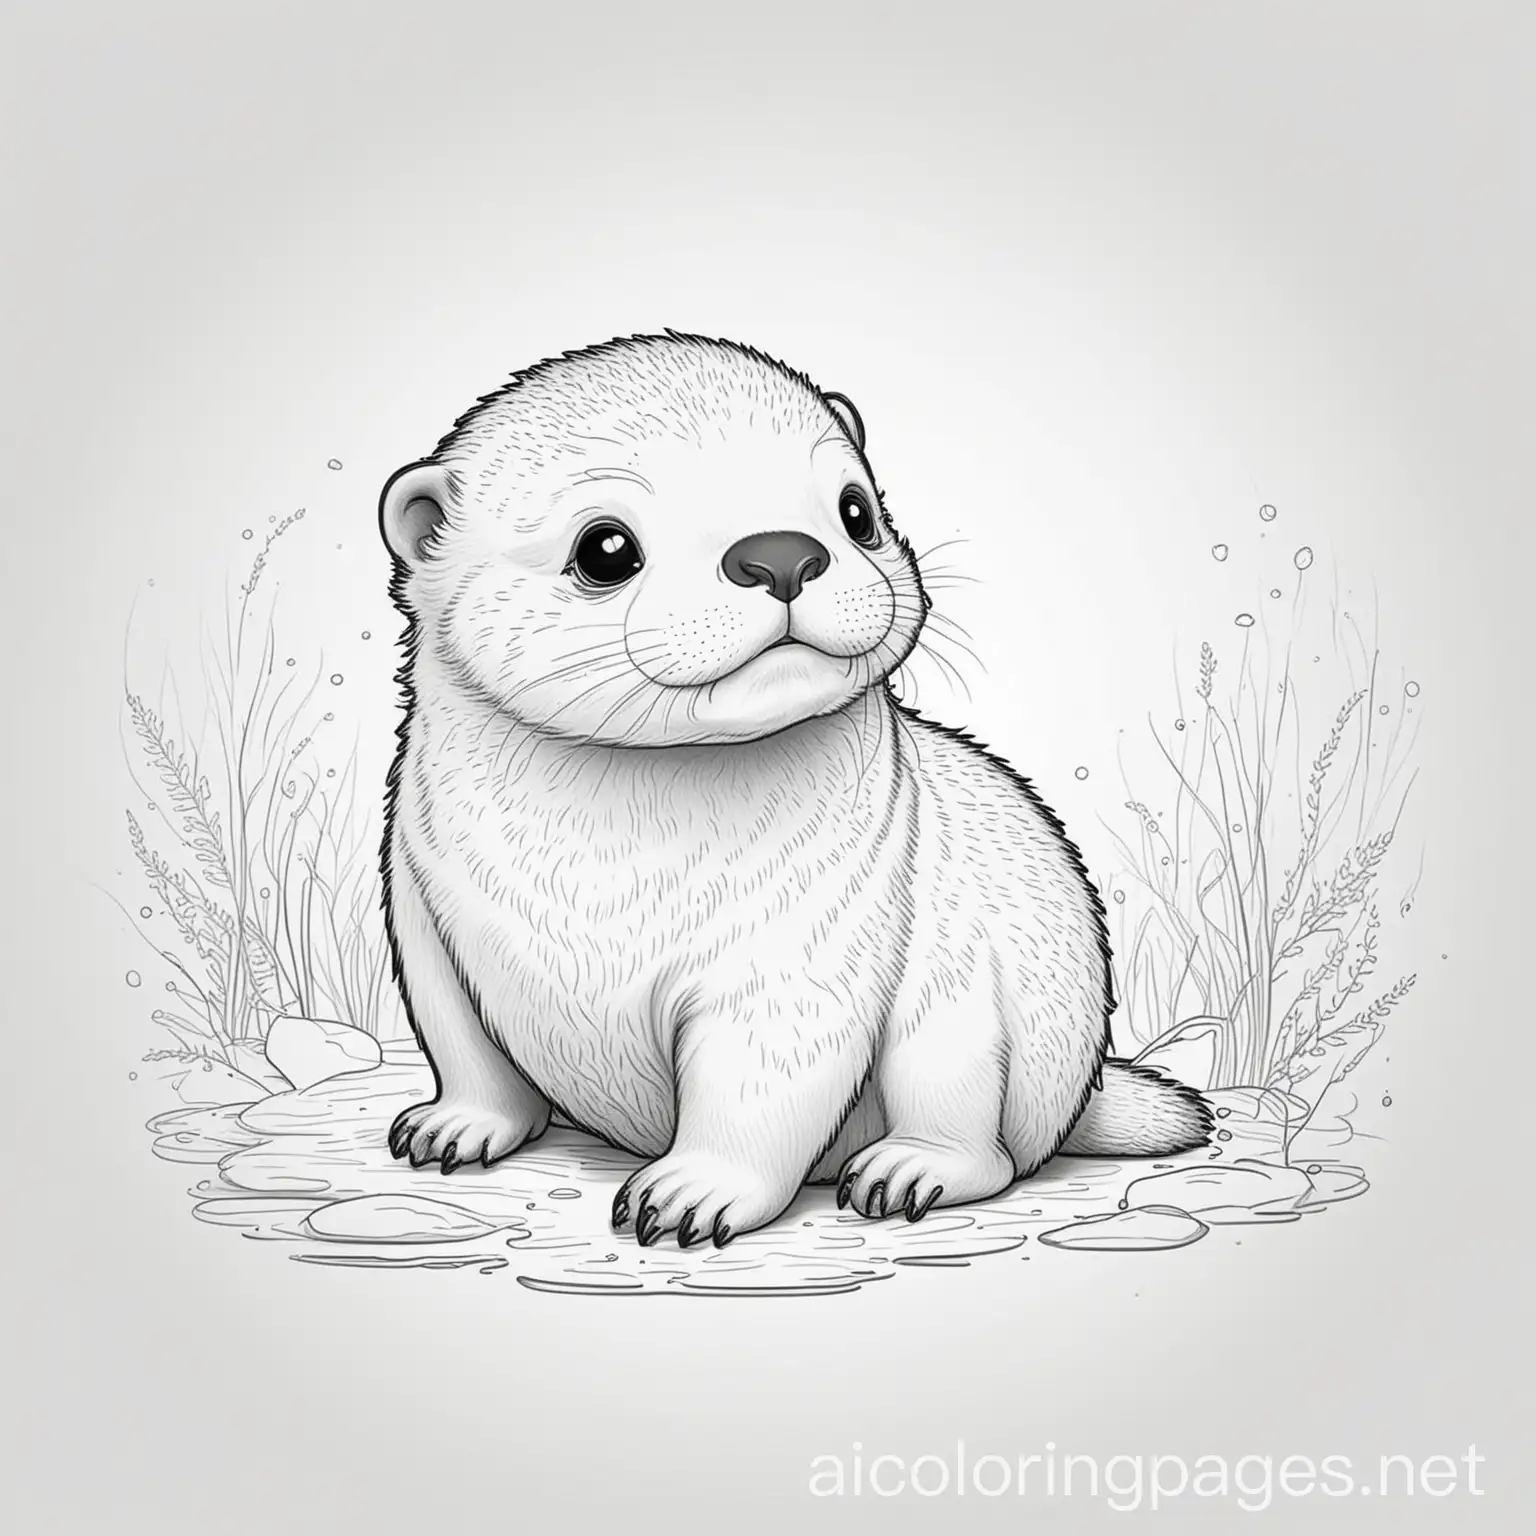 A cute baby otter to color, Coloring Page, black and white, line art, white background, Simplicity, Ample White Space.